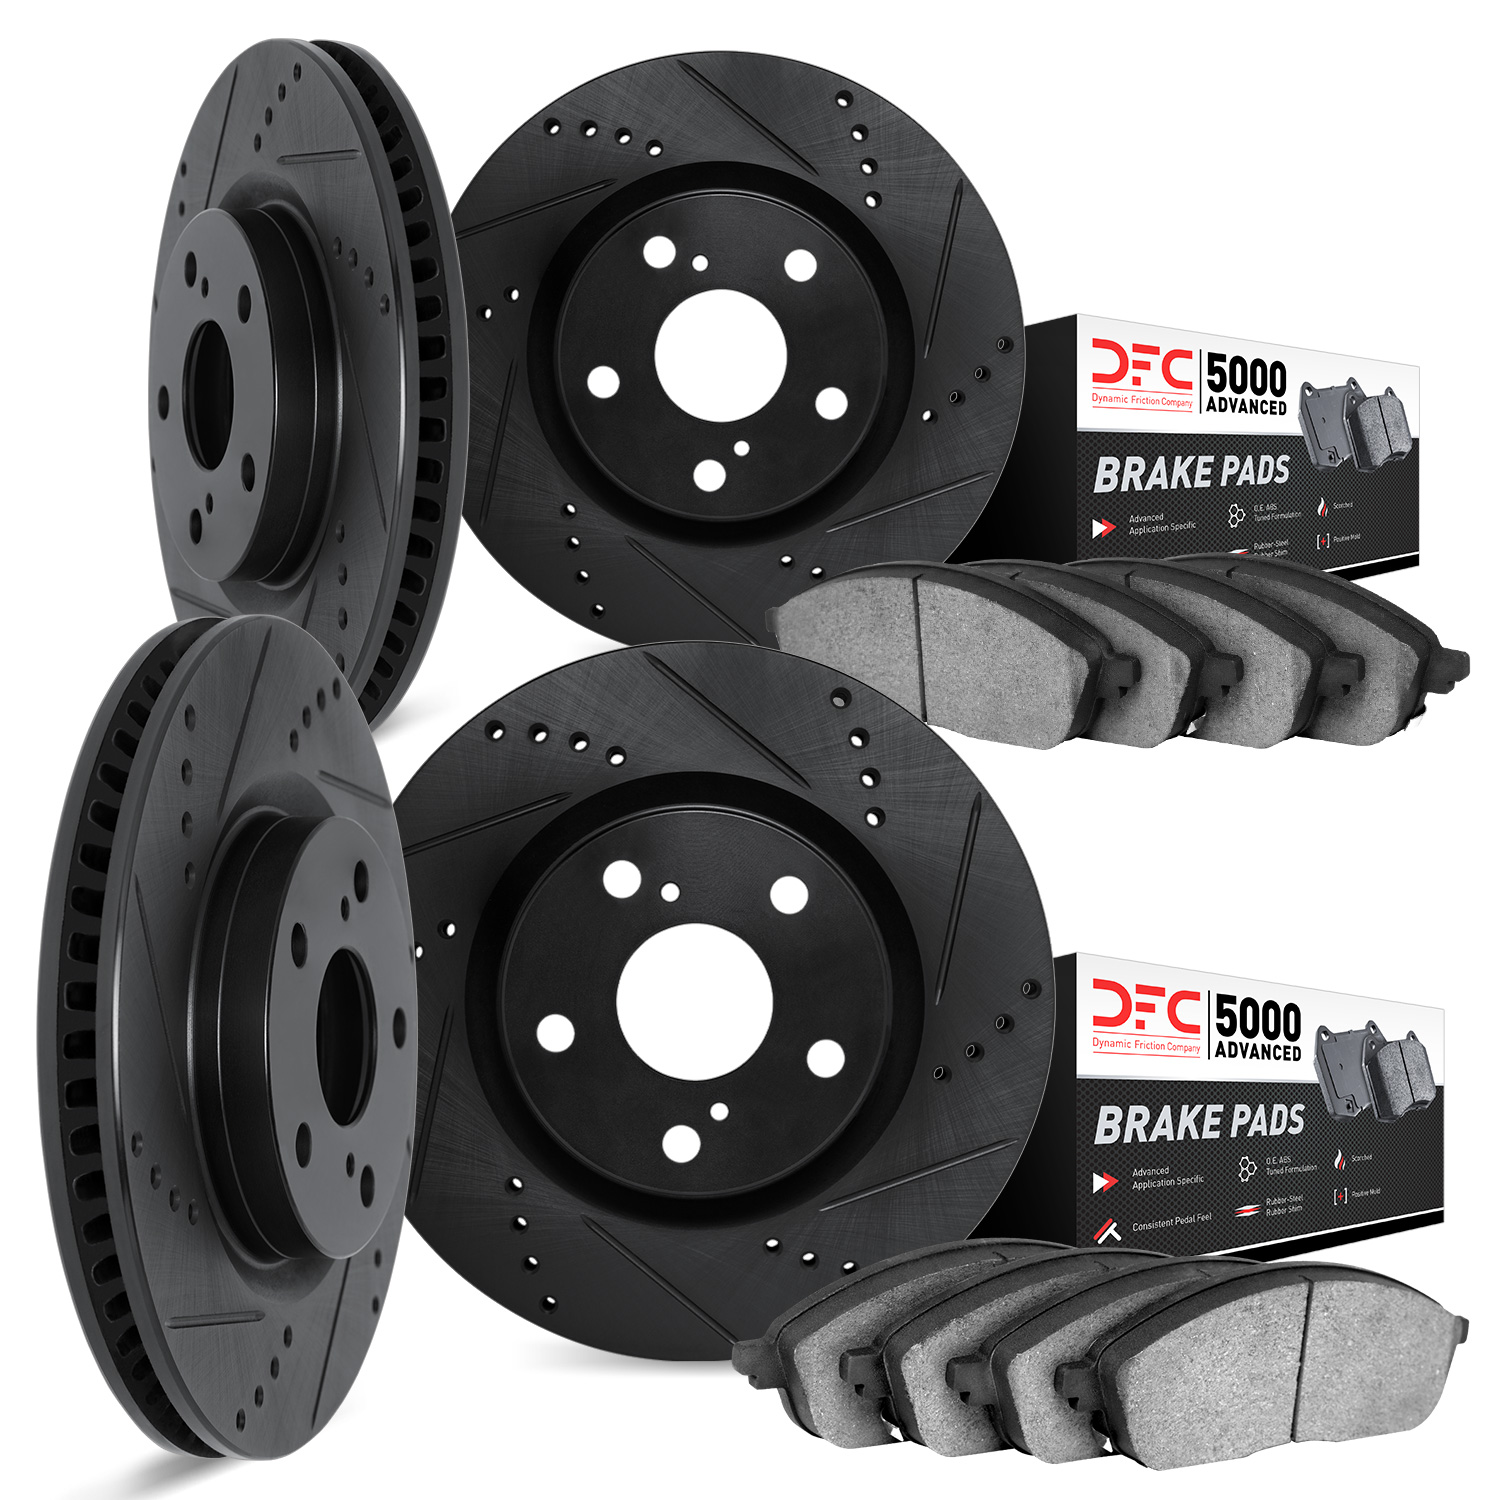 8504-46023 Drilled/Slotted Brake Rotors w/5000 Advanced Brake Pads Kit [Black], 2008-2014 GM, Position: Front and Rear